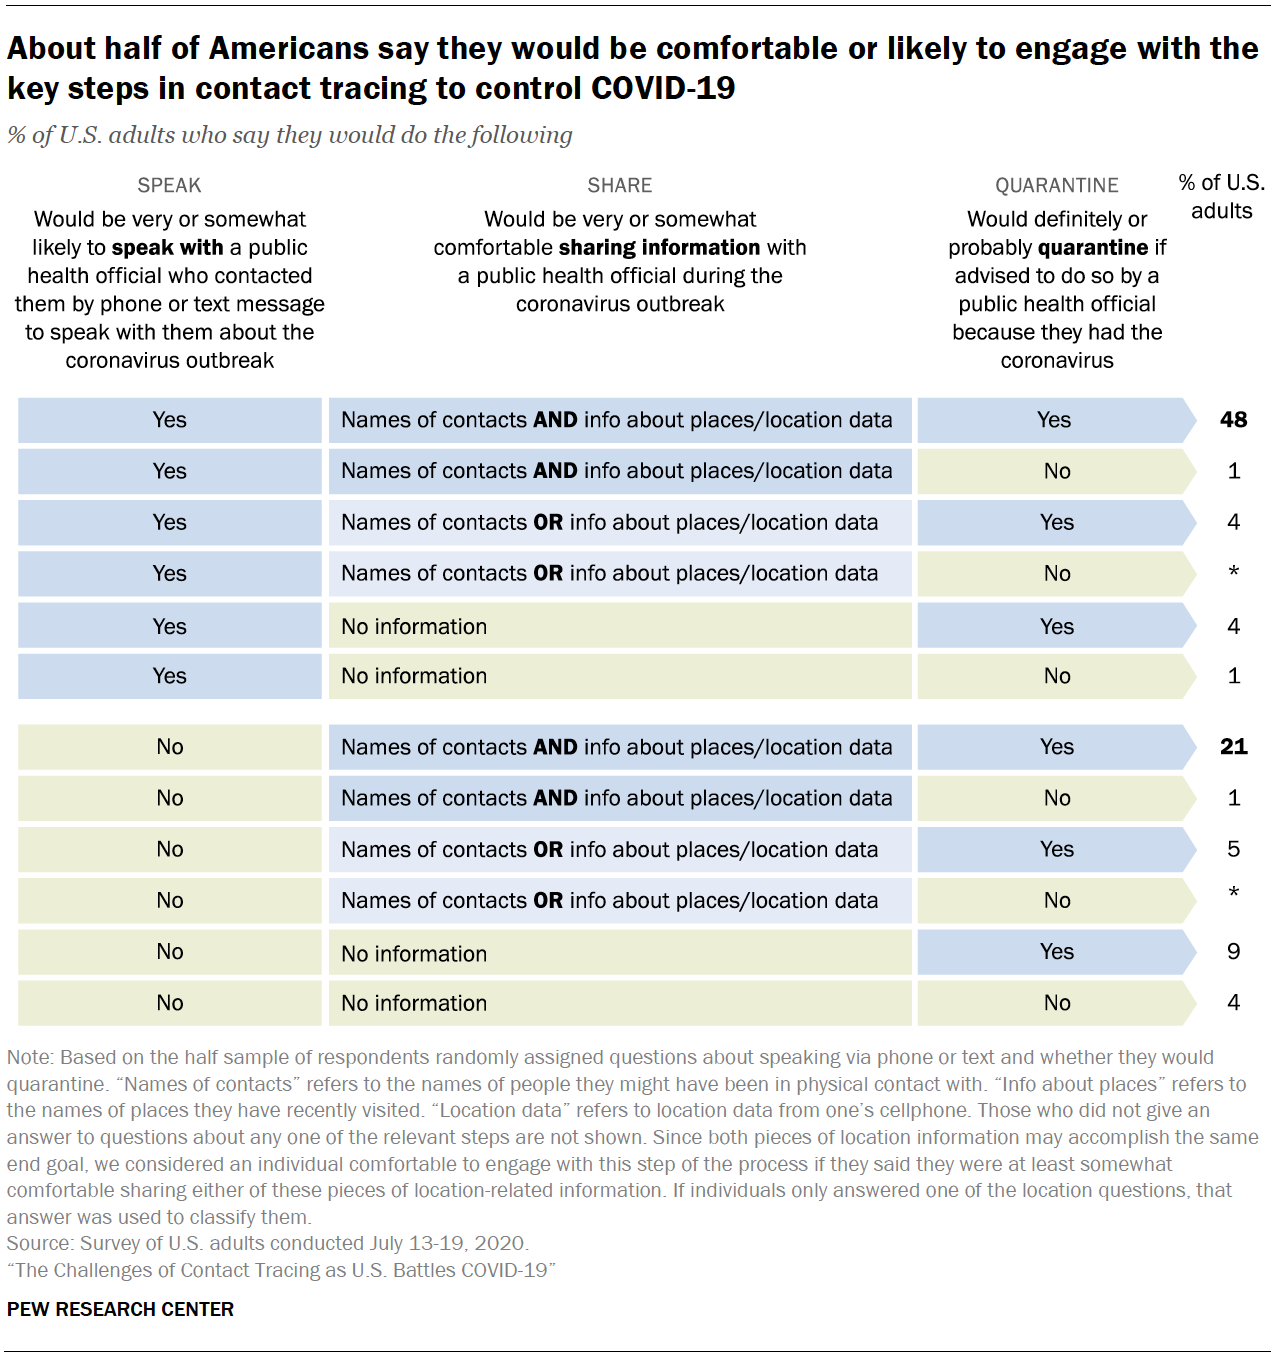 Chart shows about half of Americans say they would be comfortable or likely to engage with the key steps in contact tracing to control COVID-19